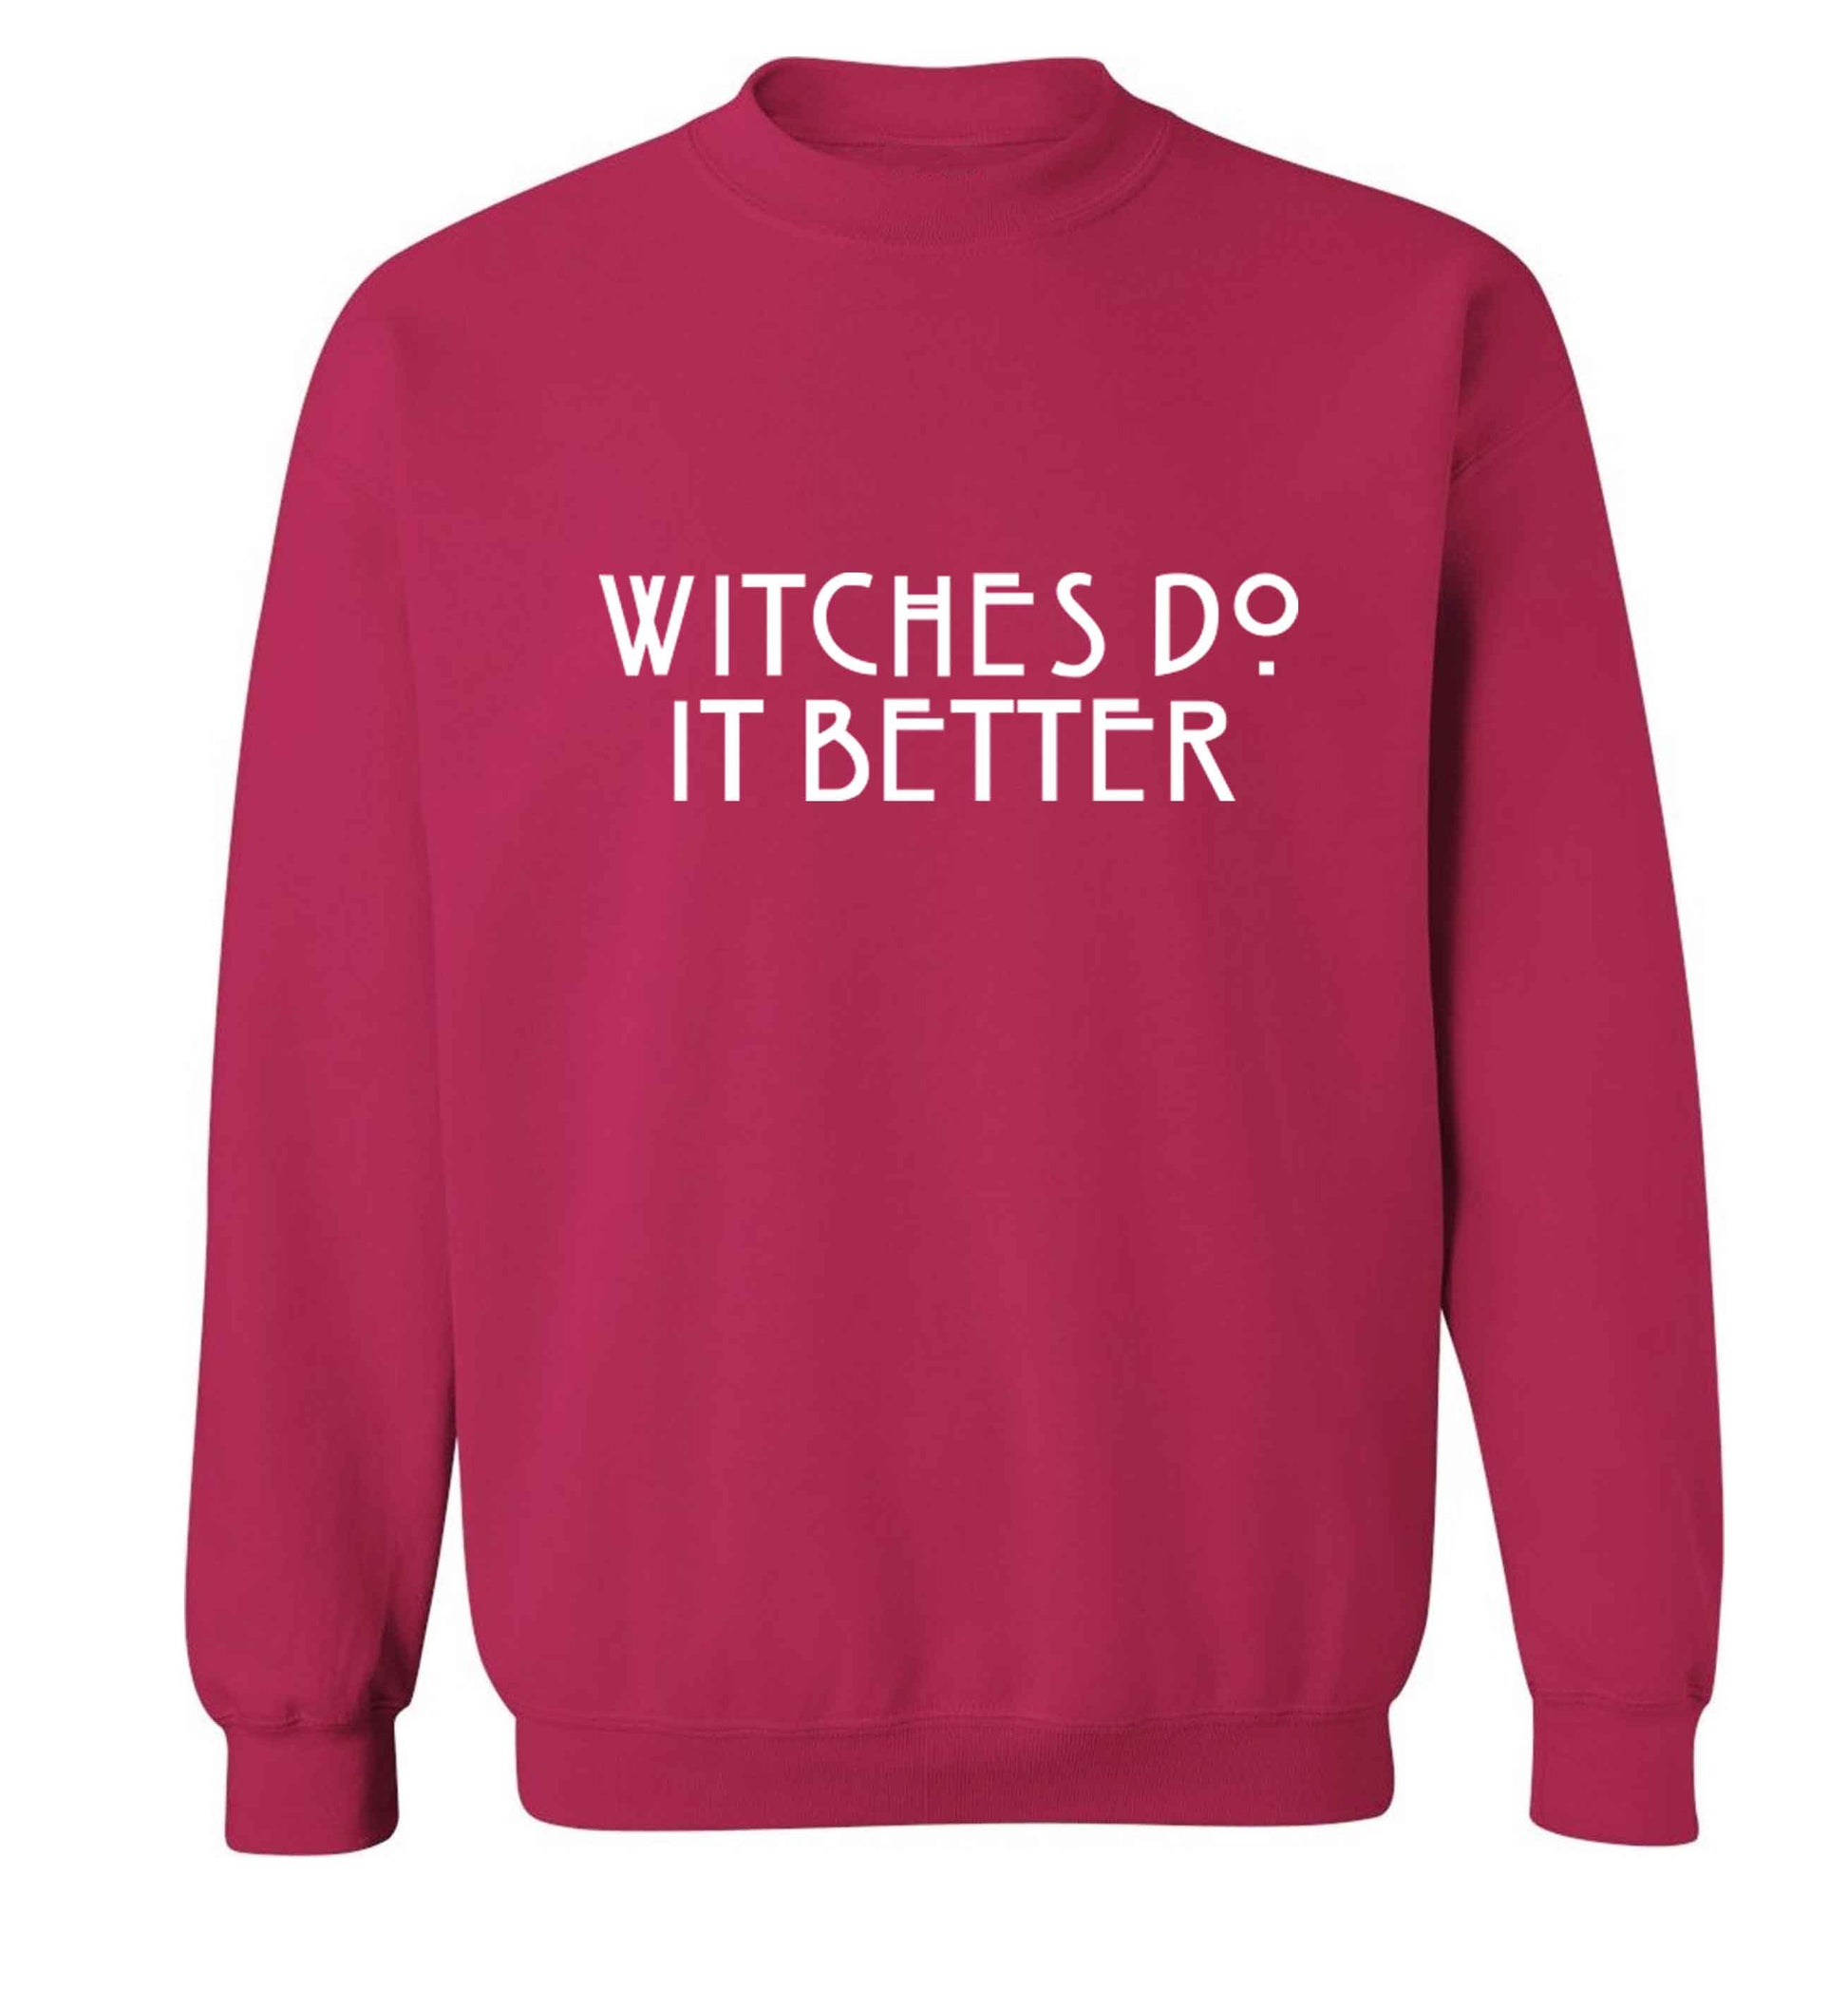 Witches do it better adult's unisex pink sweater 2XL